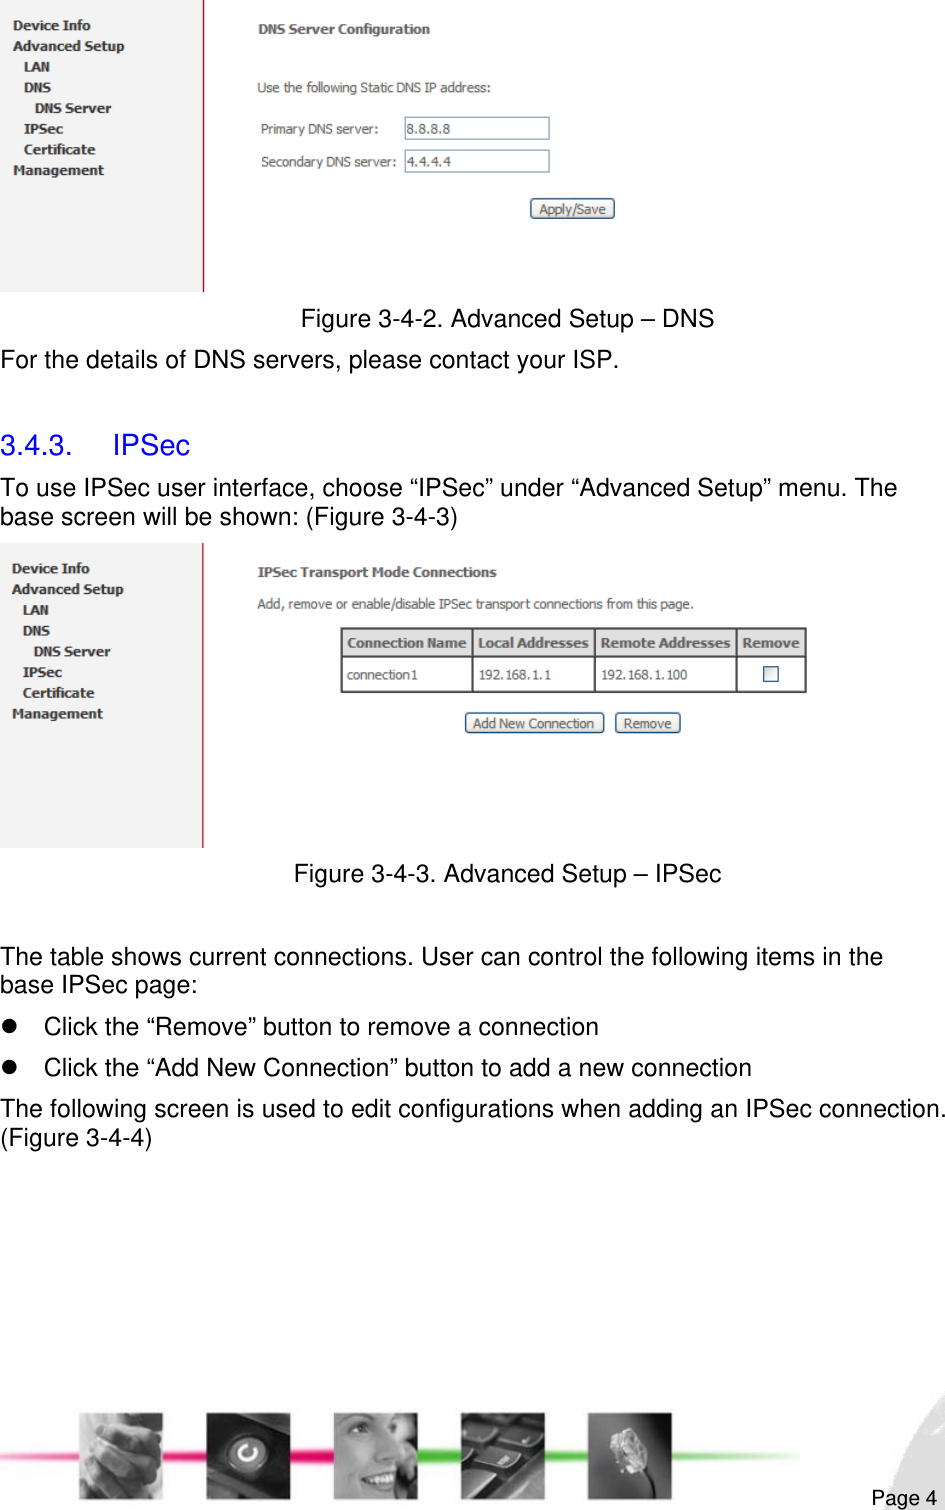                                                                                                                                                                                                        Figure 3-4-2. Advanced Setup – DNS For the details of DNS servers, please contact your ISP.  3.4.3. IPSec To use IPSec user interface, choose “IPSec” under “Advanced Setup” menu. The base screen will be shown: (Figure 3-4-3)  Figure 3-4-3. Advanced Setup – IPSec  The table shows current connections. User can control the following items in the base IPSec page: z  Click the “Remove” button to remove a connection z  Click the “Add New Connection” button to add a new connection The following screen is used to edit configurations when adding an IPSec connection. (Figure 3-4-4)  Page 4 